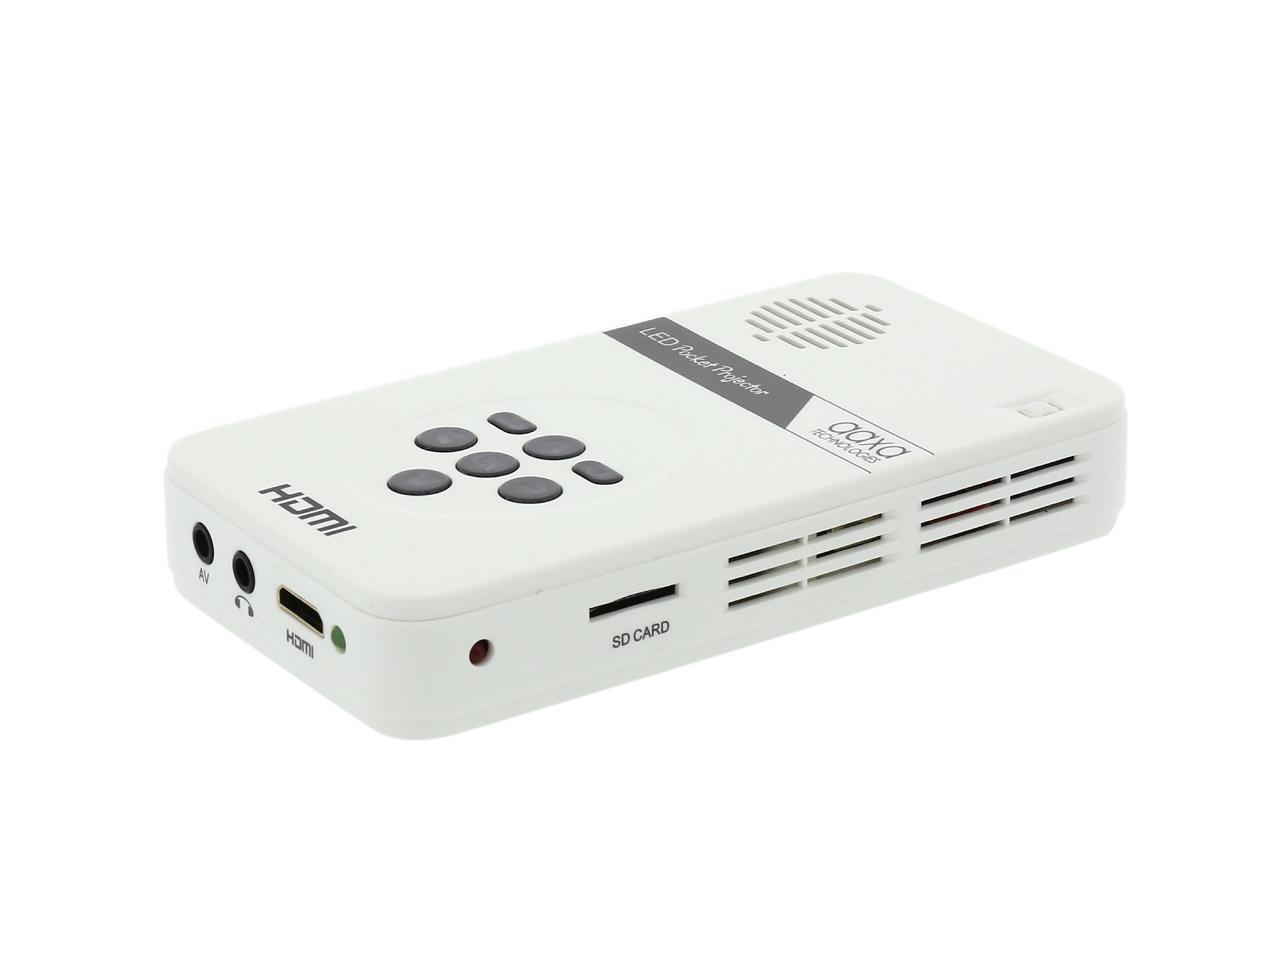 Broers en zussen Preek gebruik AAXA LED Pico Mini Portable Projector with Battery, HDMI, and Native 720p  HD Resolution for Home and Travel - Newegg.com